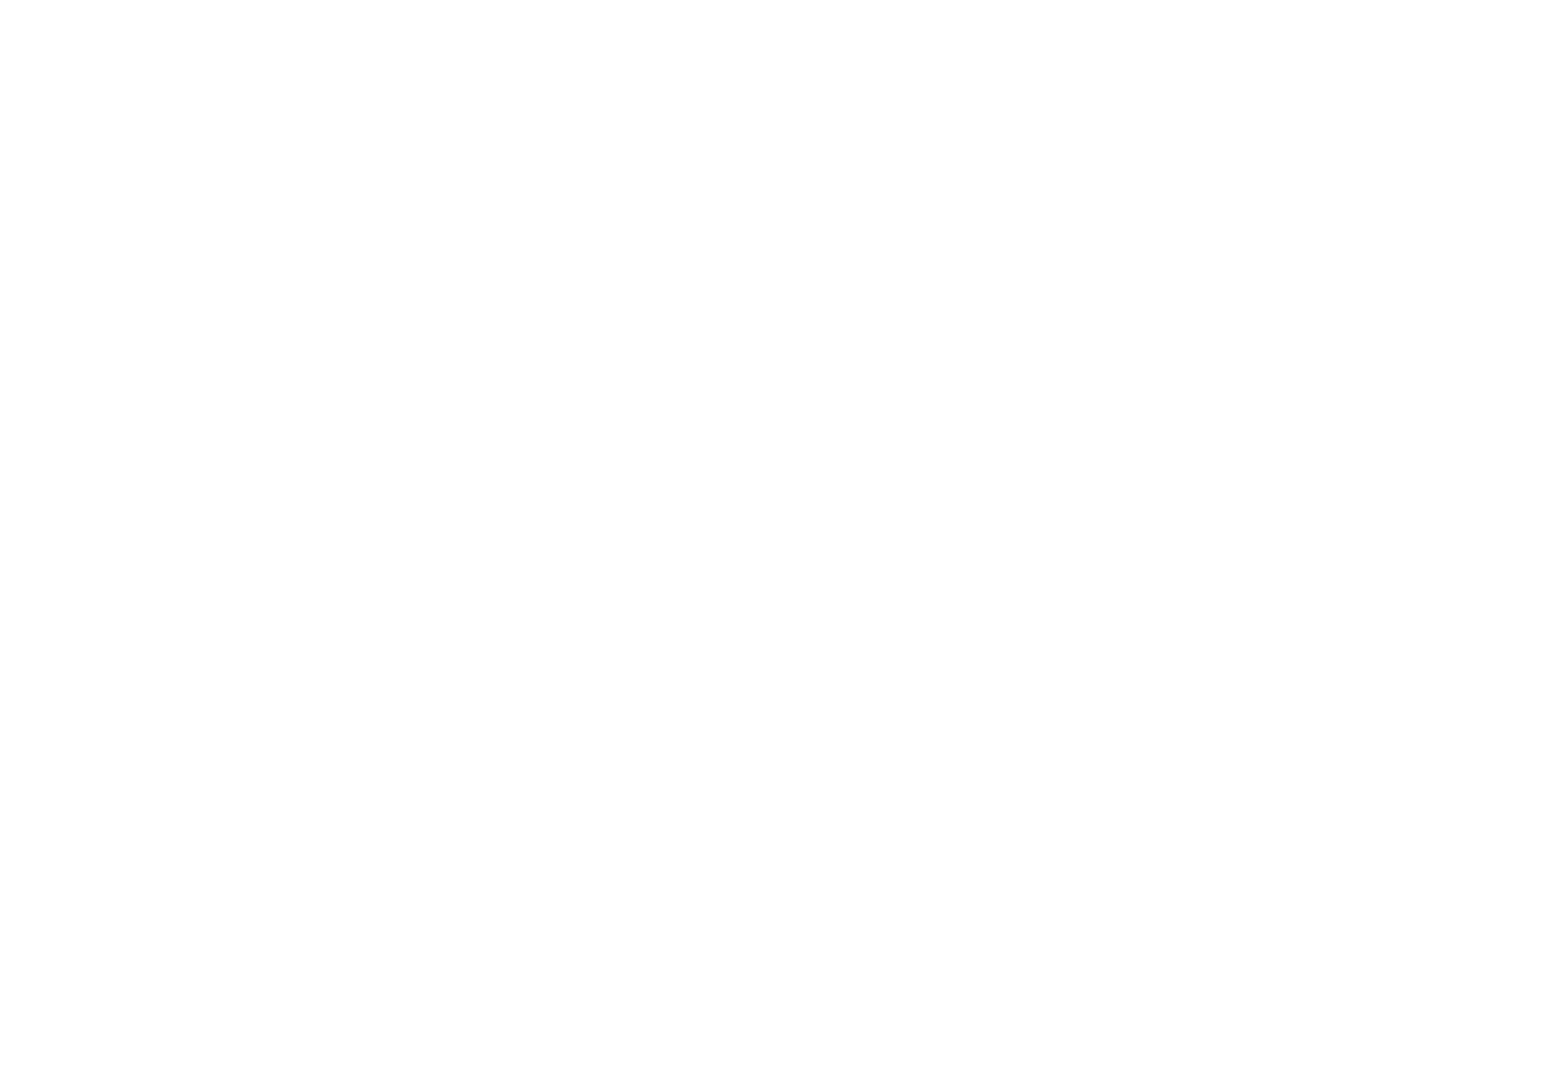 Grow Glide Division Of Pipp Horticulture